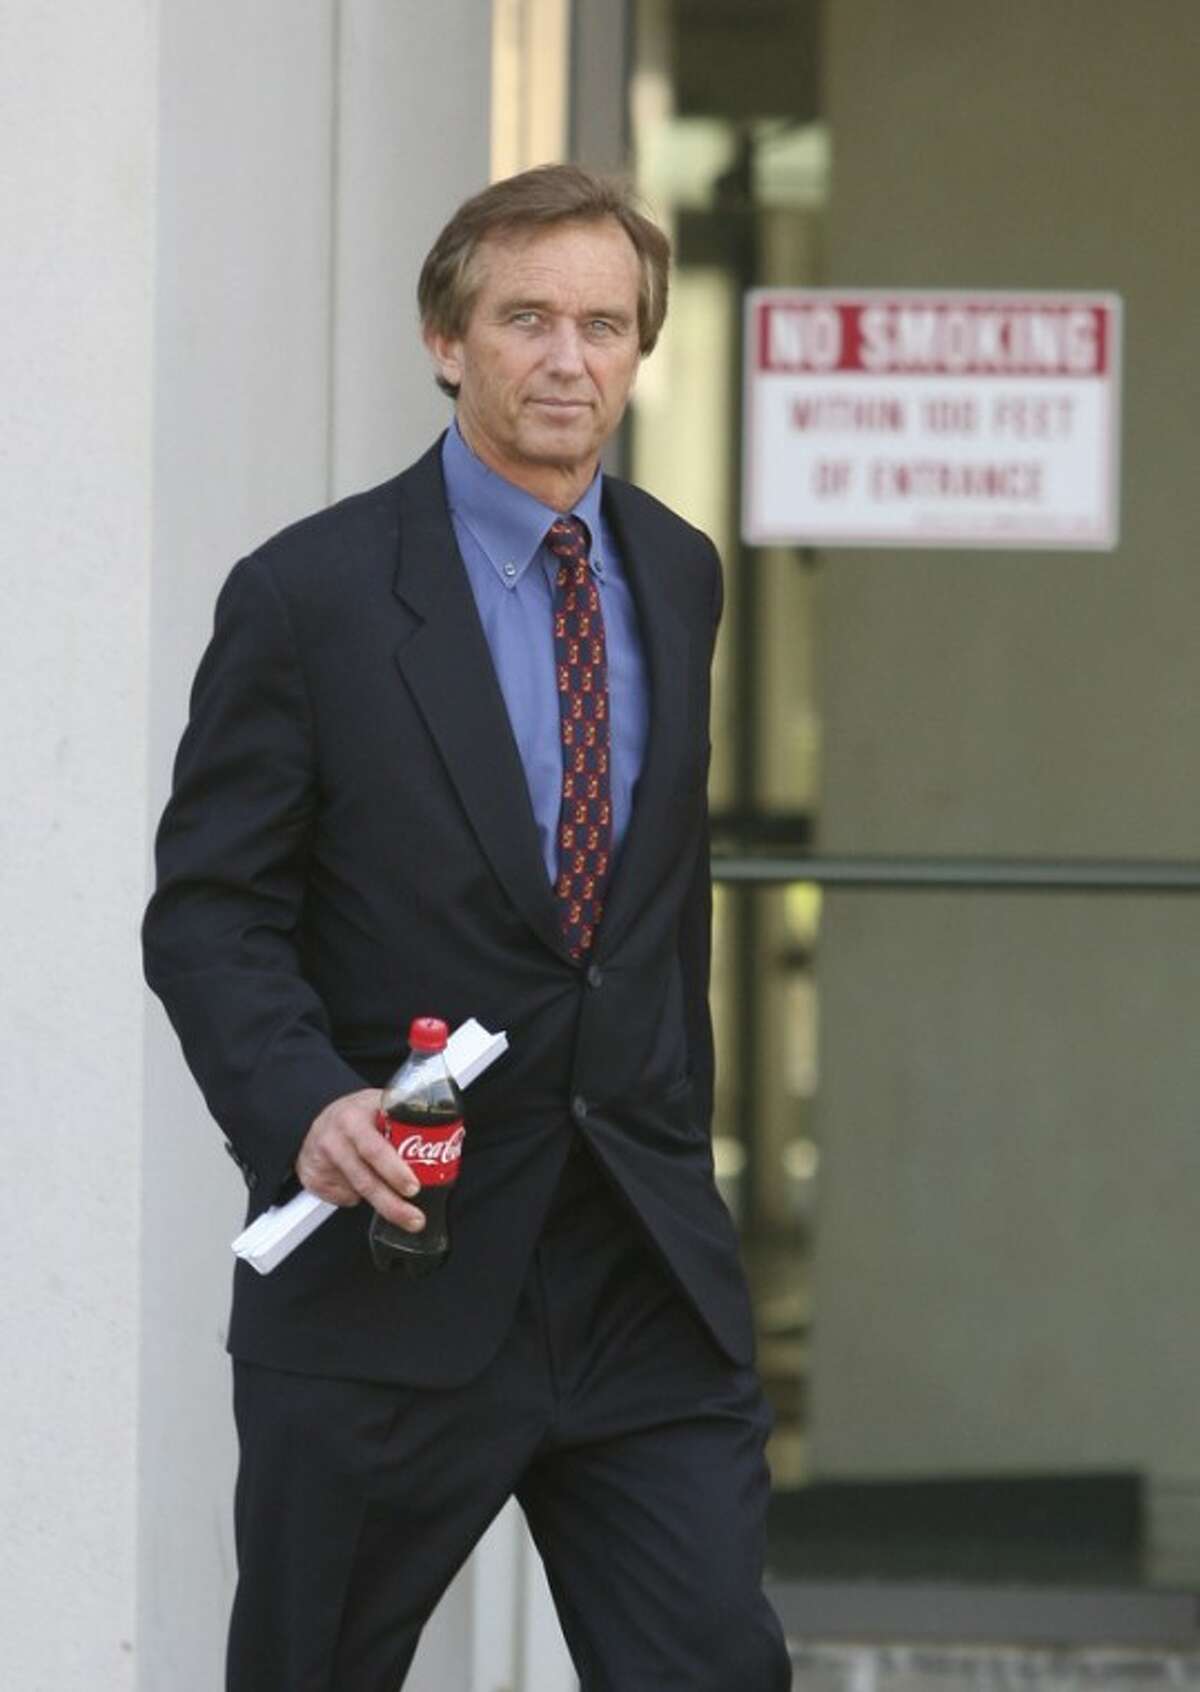 Robert F. Kennedy Jr. leaves the Westchester County Courthouse in White Plains, N.Y., on Friday, May 18, 2012, after he and members of the Mary Richardson Kennedy family met in court to decide who would get possession of his late wife's body. Mary Richardson Kennedy committed suicide by hanging herself on Wednesday, May 16, 2012. She was 52. ( AP Photo/The Journal News, Mark Vergari) NYC OUT, NO SALES, ONLINE OUT, TV OUT, NEWSDAY INTERNET OUT